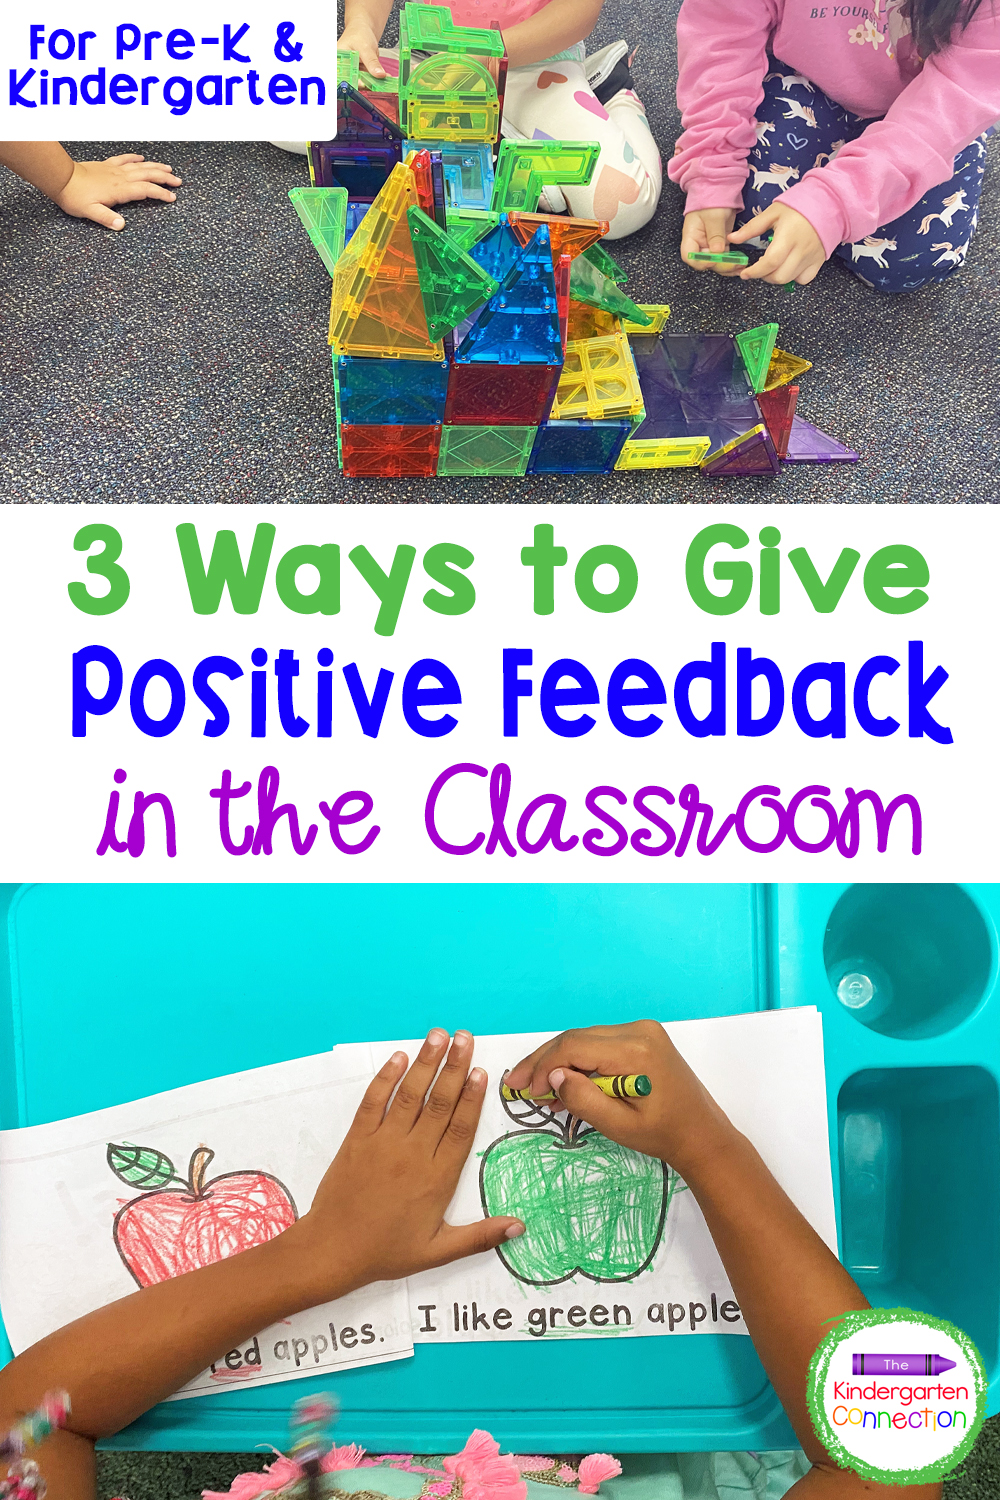 Check out these 3 ways to give meaningful, positive feedback in the classroom, instead of just saying “Good Job!”